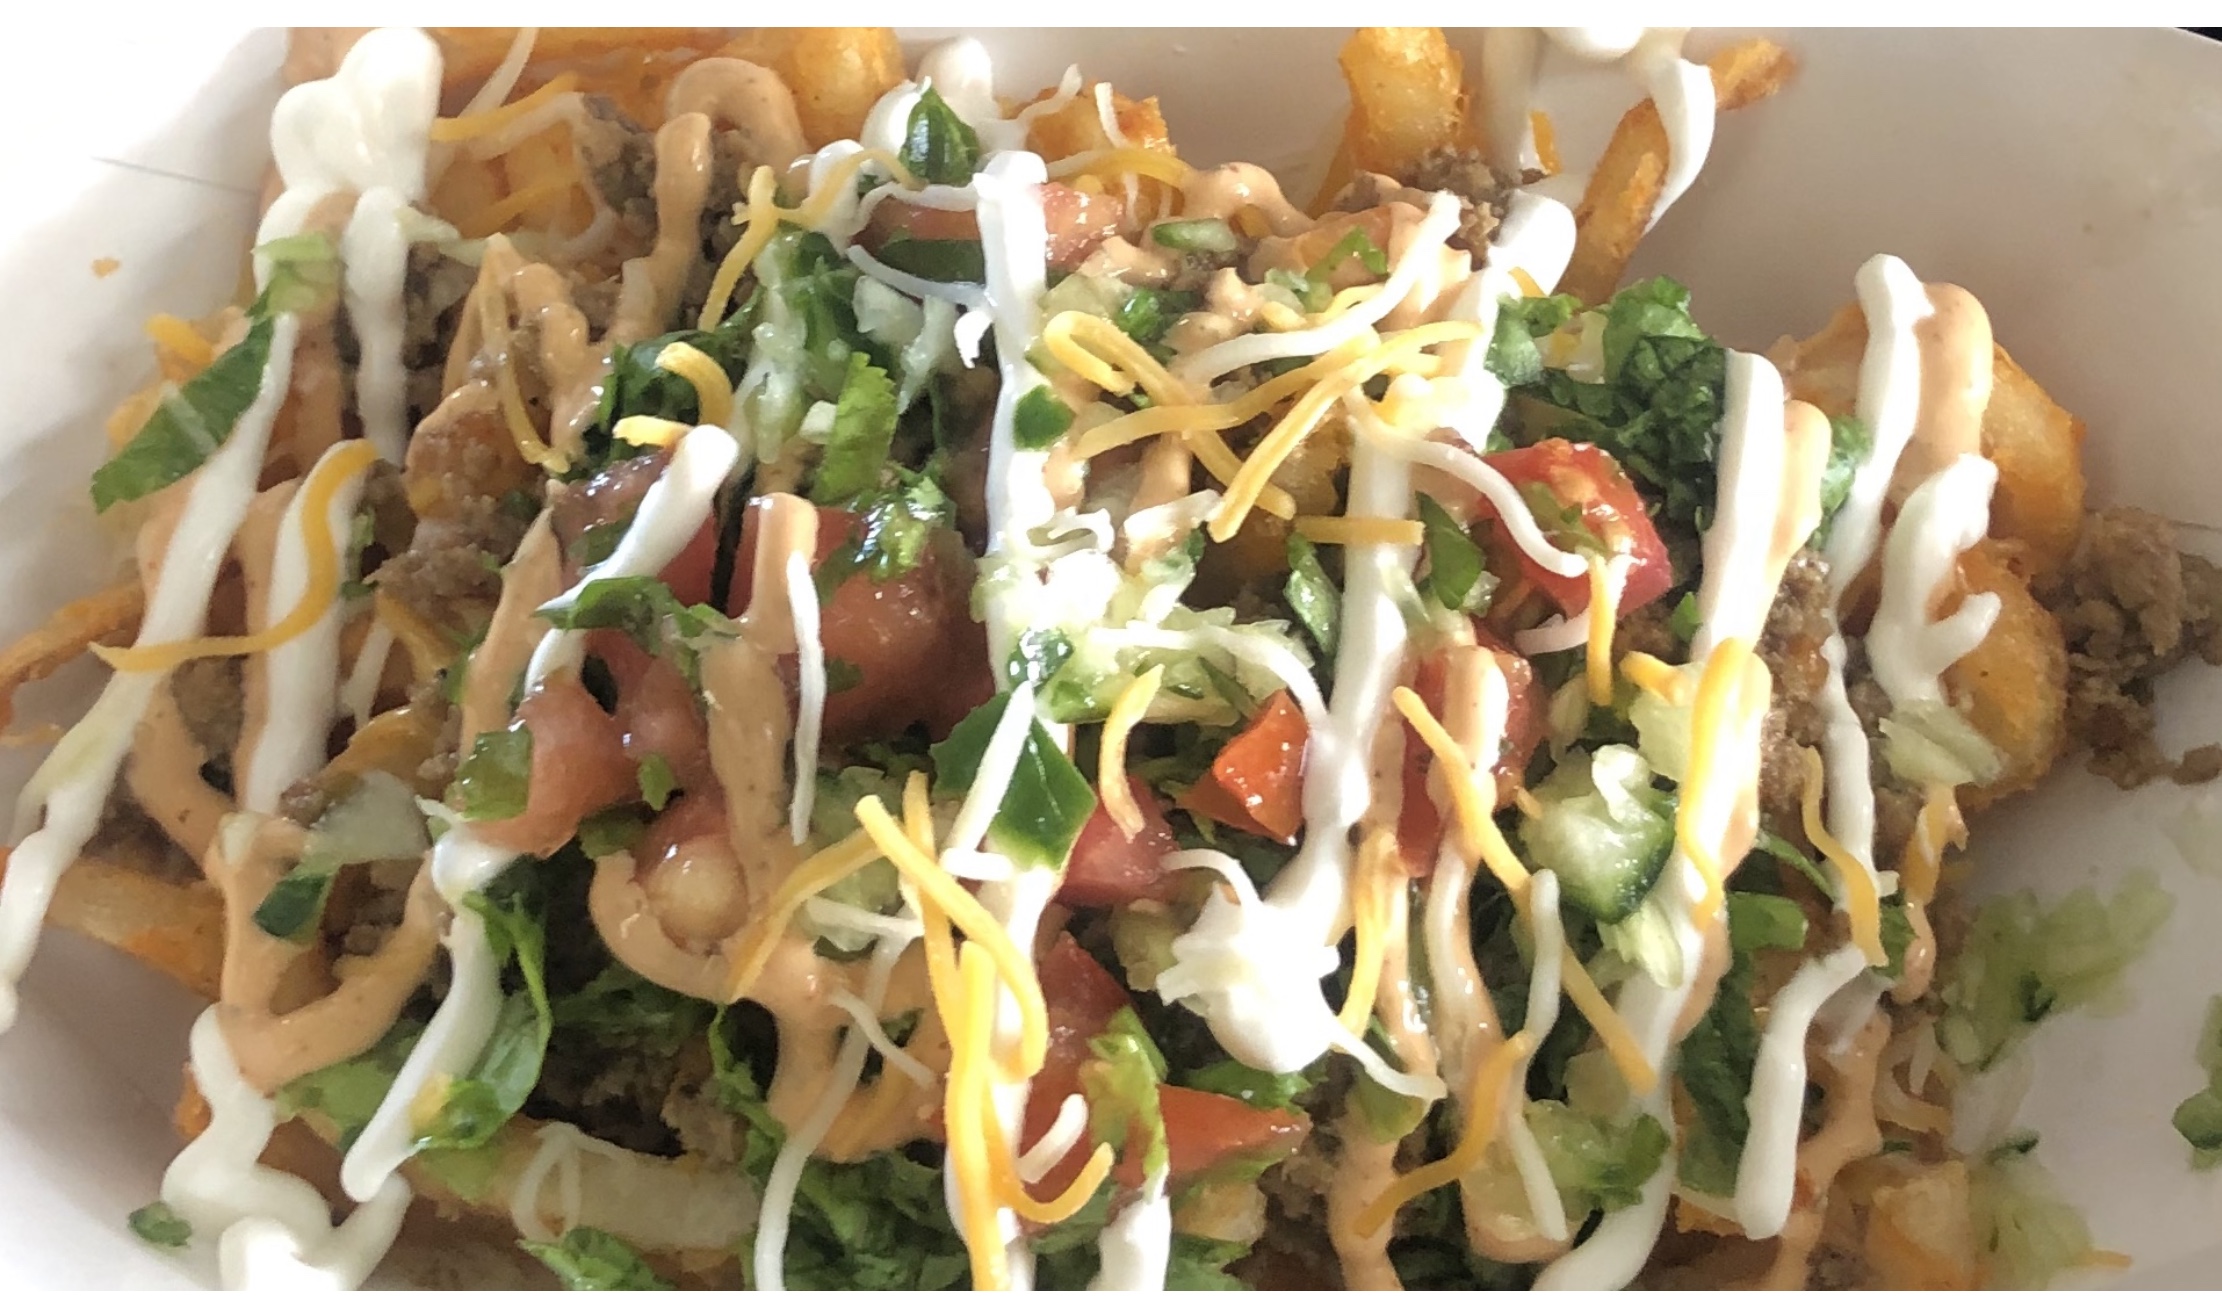 One of the many main food items available at the Mr. Prince Gourmet Mobile Food Truck. (Photo provided by Teresa Chapman)